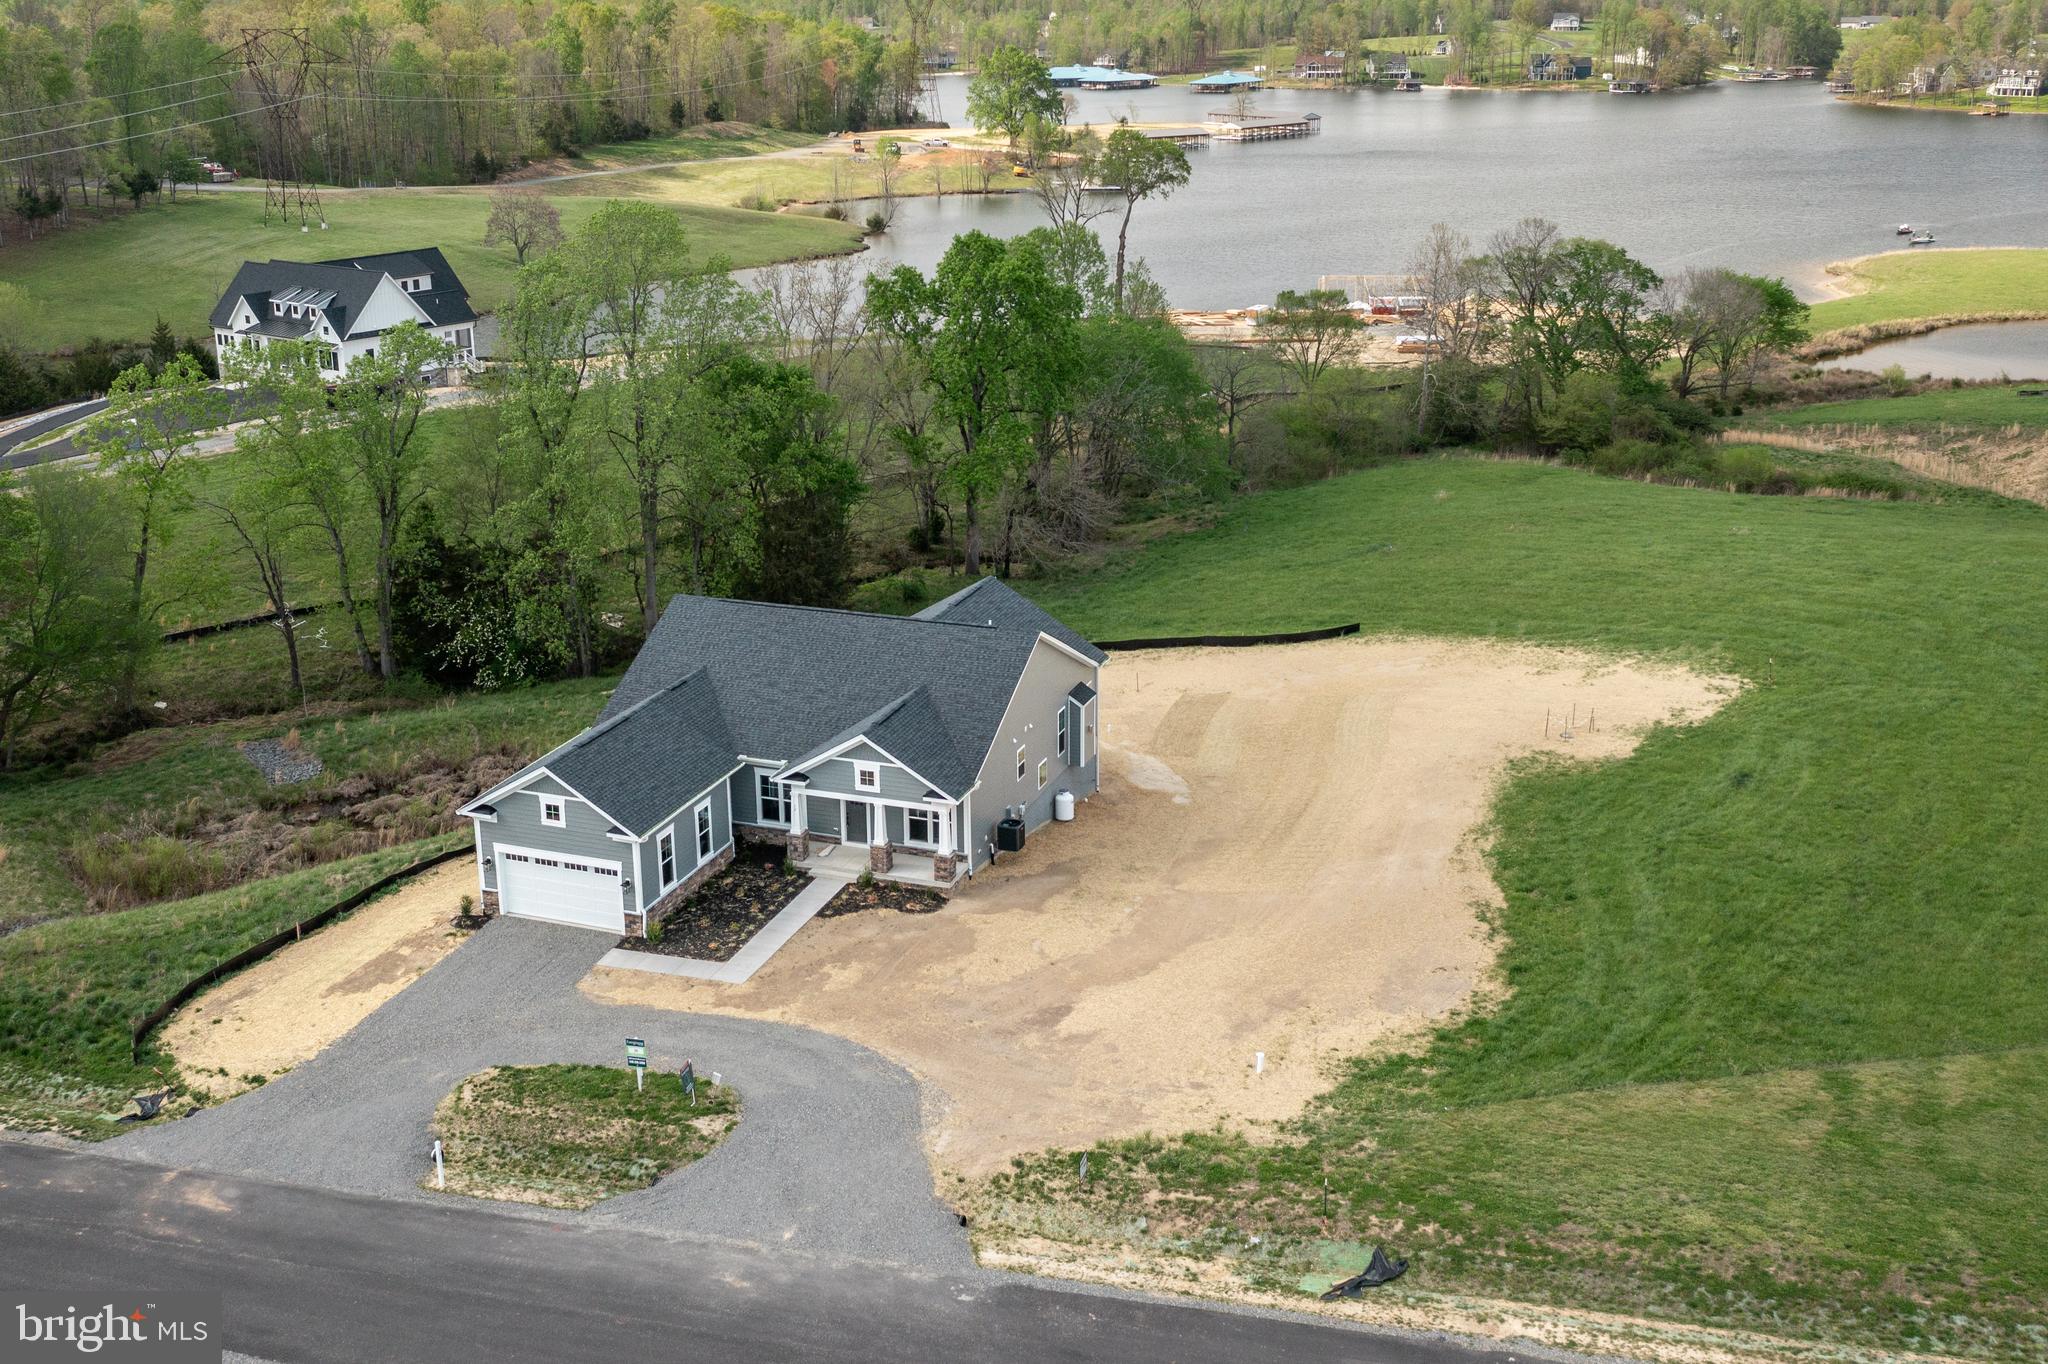 an aerial view of a house with outdoor space lake view and a yard